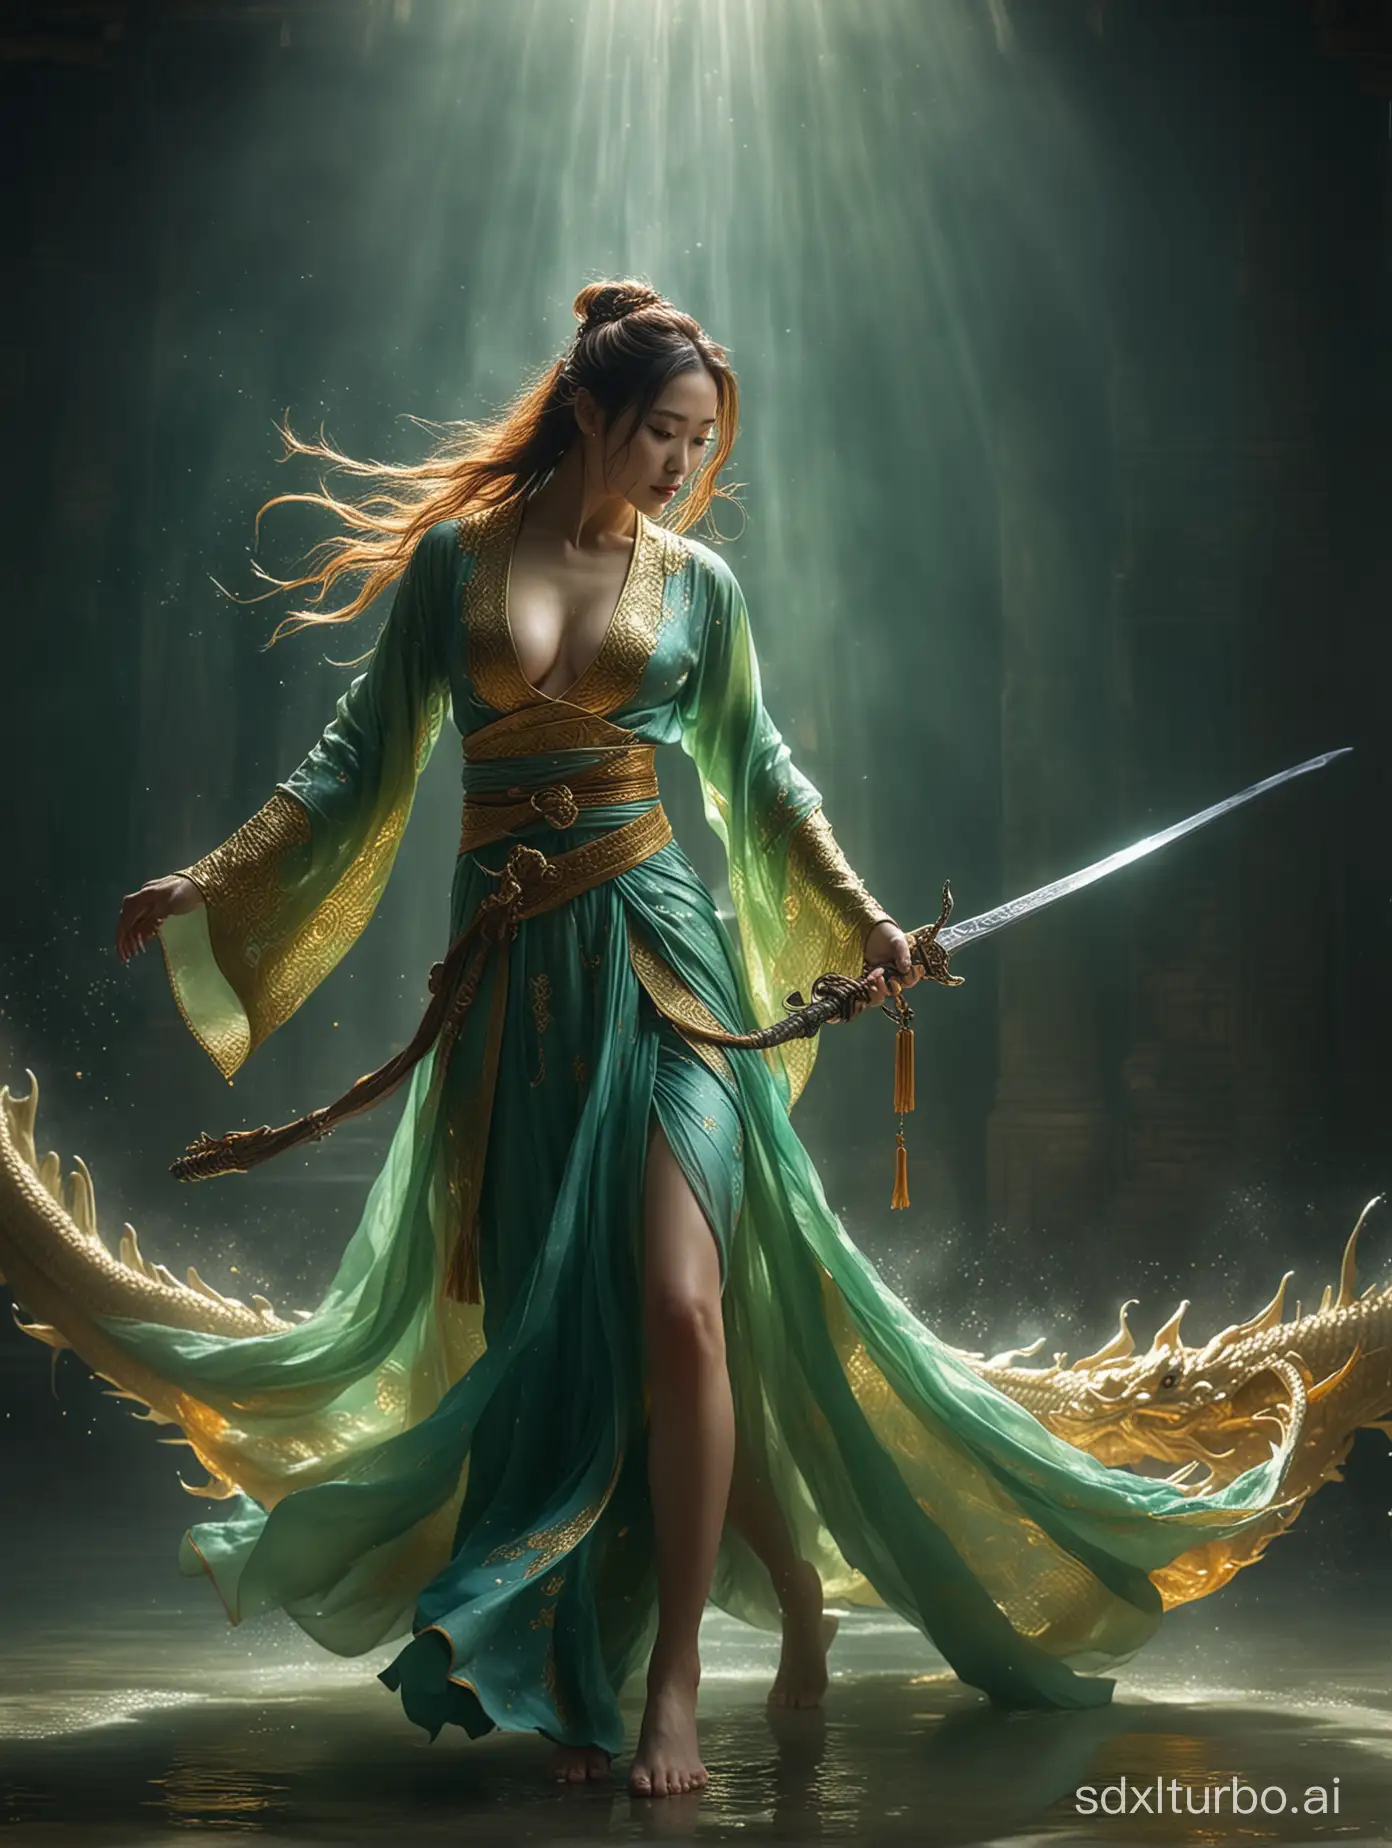 Oriental style beauty, sword in hand, sword dancing, green and gold clothing, a glowing golden dragon walking behind, realistic and ethereal style, Eastern Zhou Dynasty, the background of the picture is the strong air flow of the picture impact, 8k, fantasy, allegorical, epic, shining blue magic light. Abstract photo, intense light, Rembrandt lighting, style in fluid color combination, surreal water, slim belly, extremely low cut revealing clothing., sagging breasts, revealing thick legs. naked belly